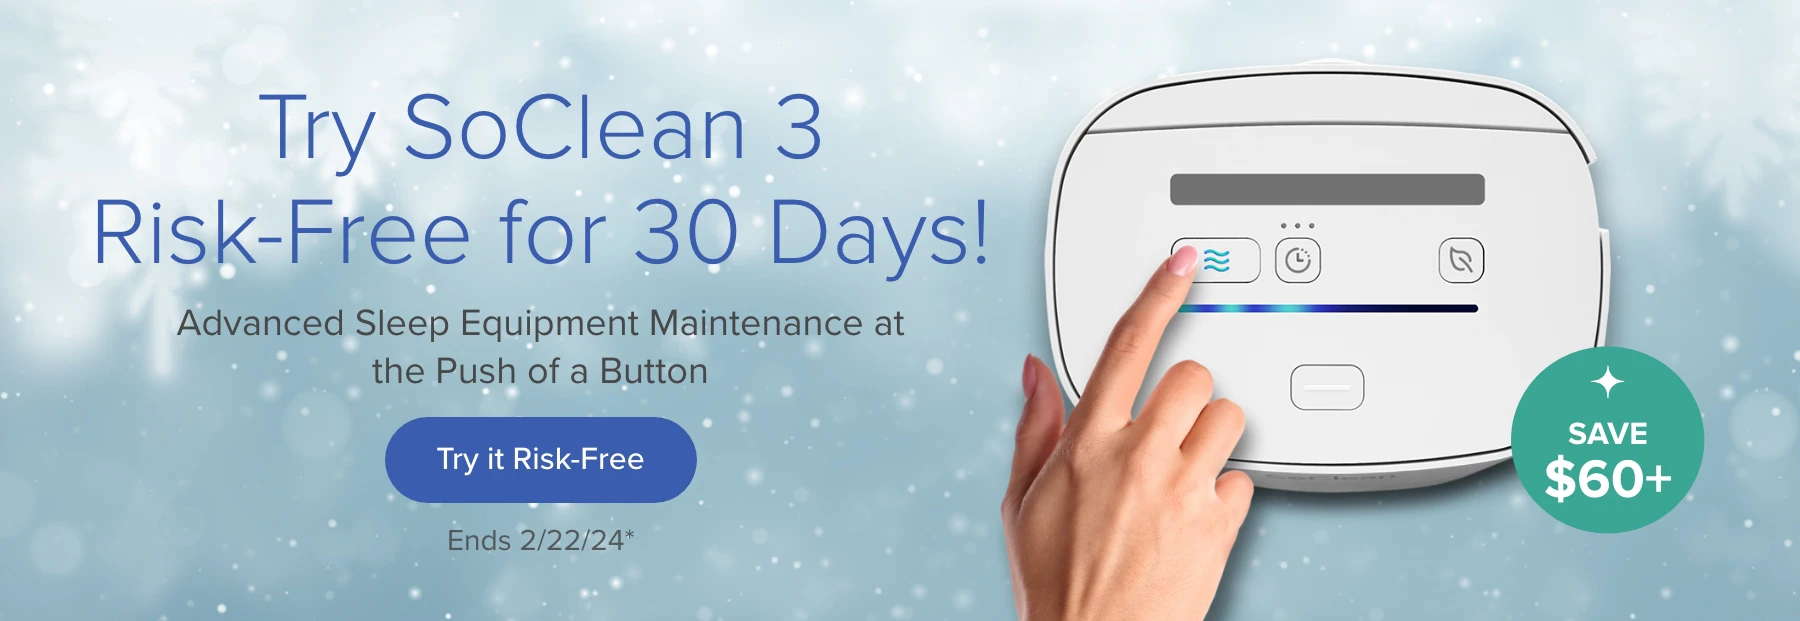 SoClean 3 is the #1 device for maintaining your sleep equipment.